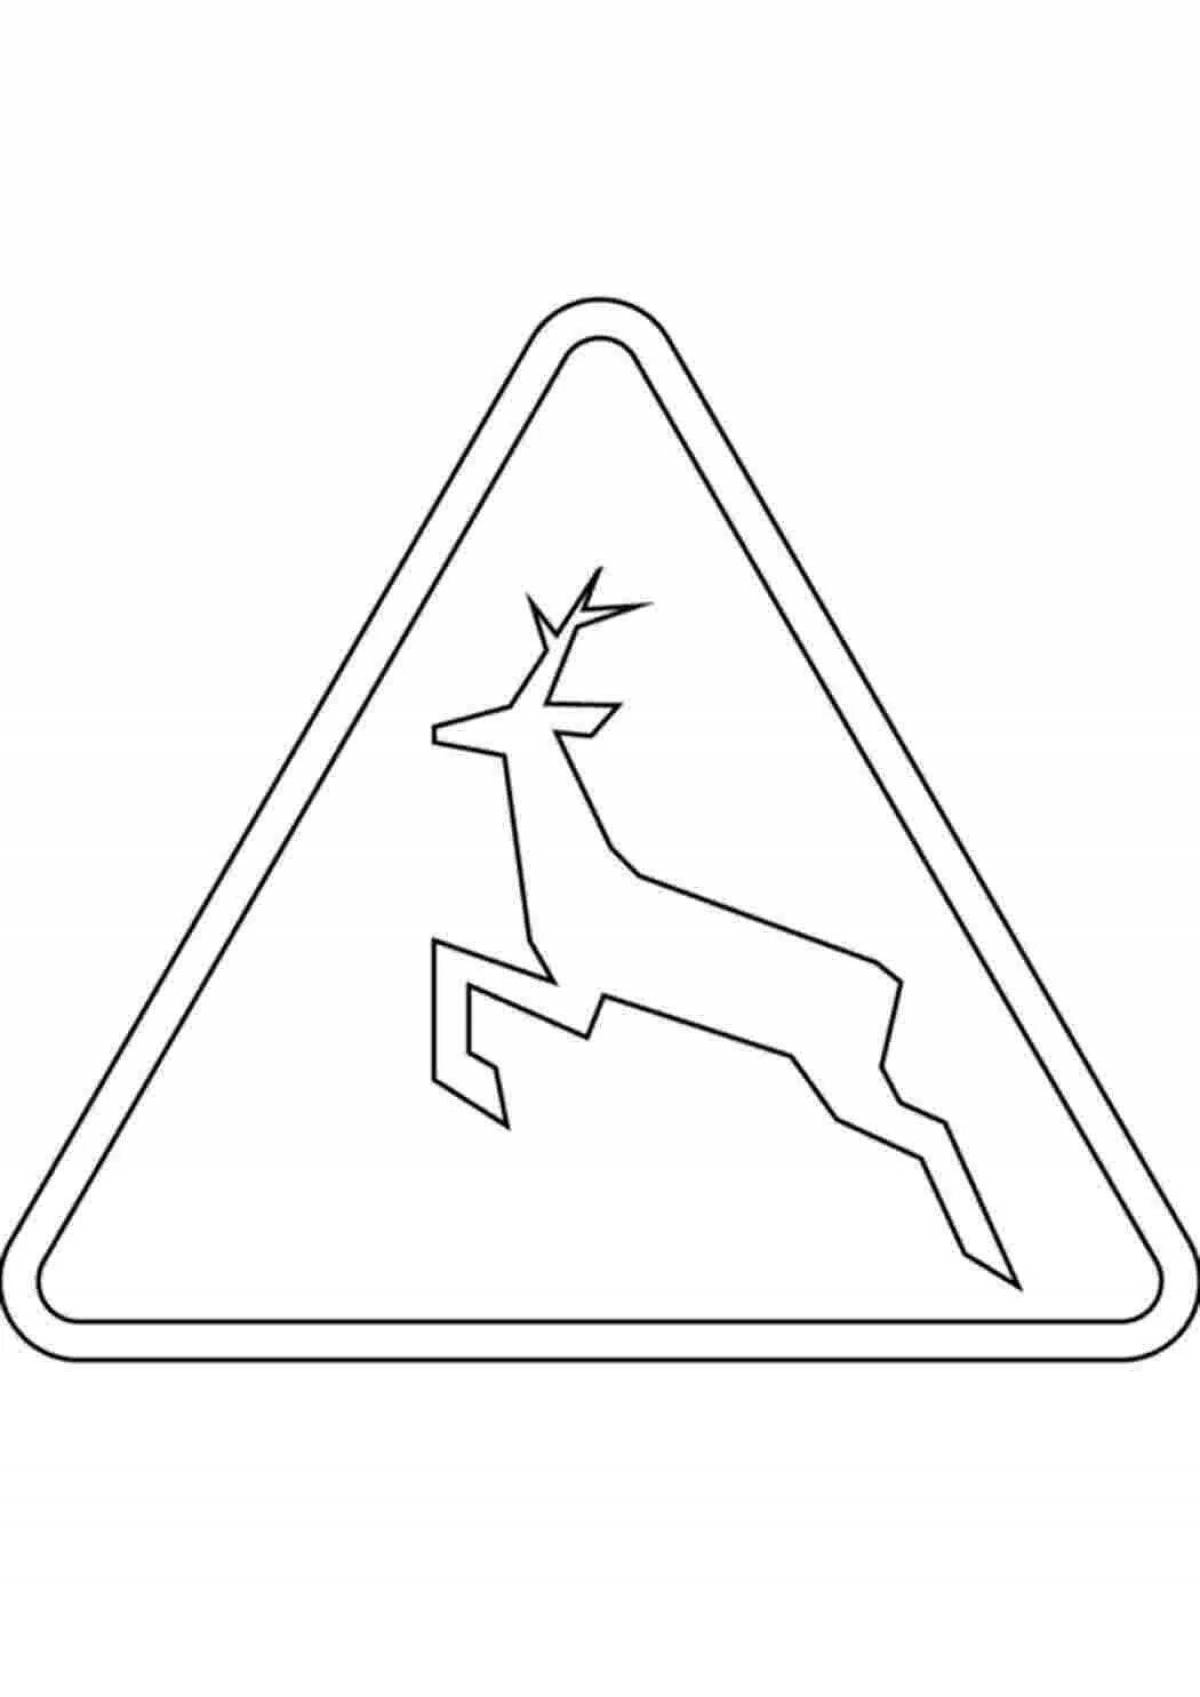 Playful traffic signs coloring page